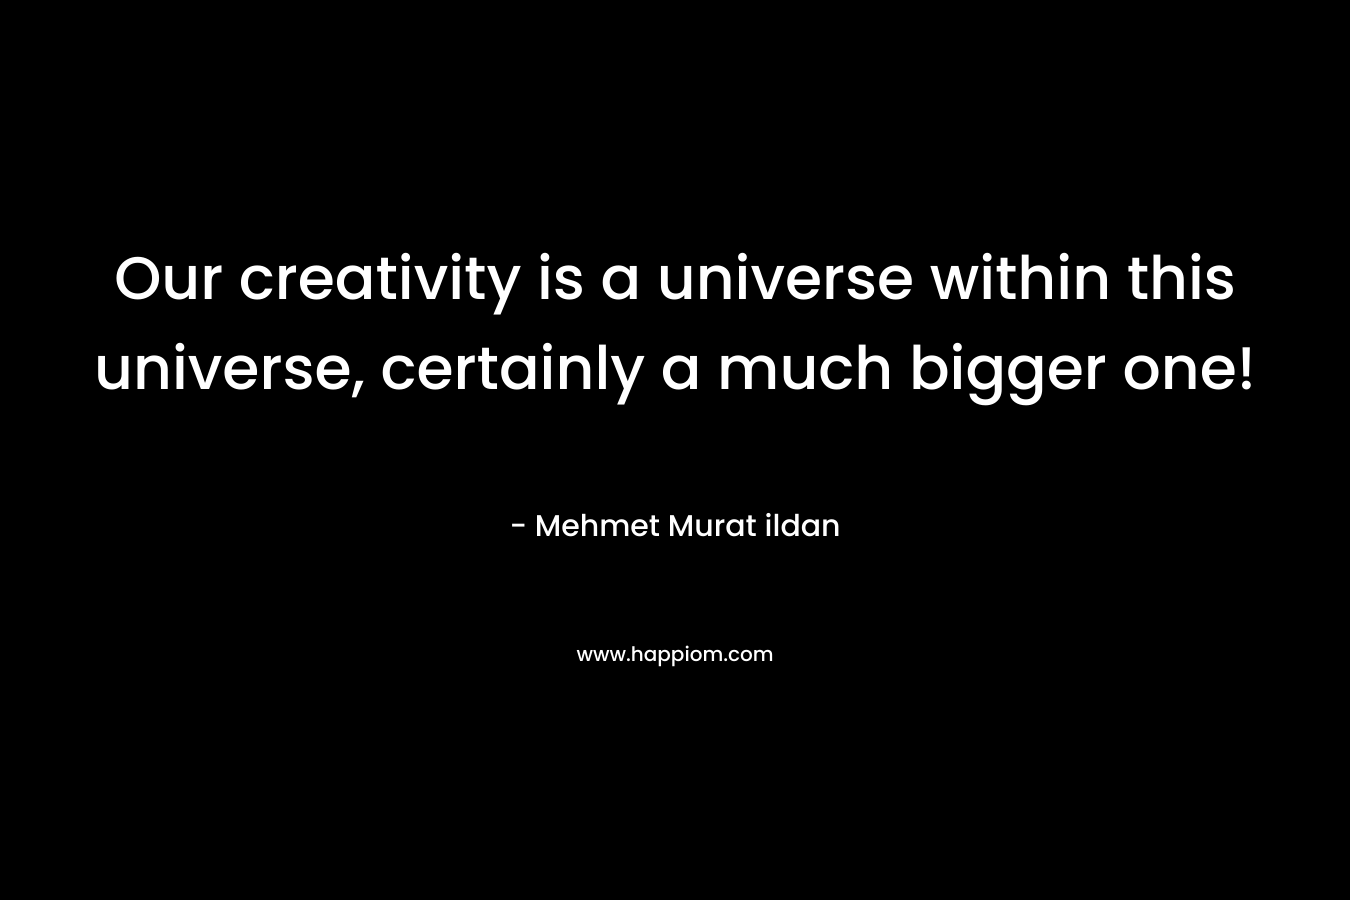 Our creativity is a universe within this universe, certainly a much bigger one!